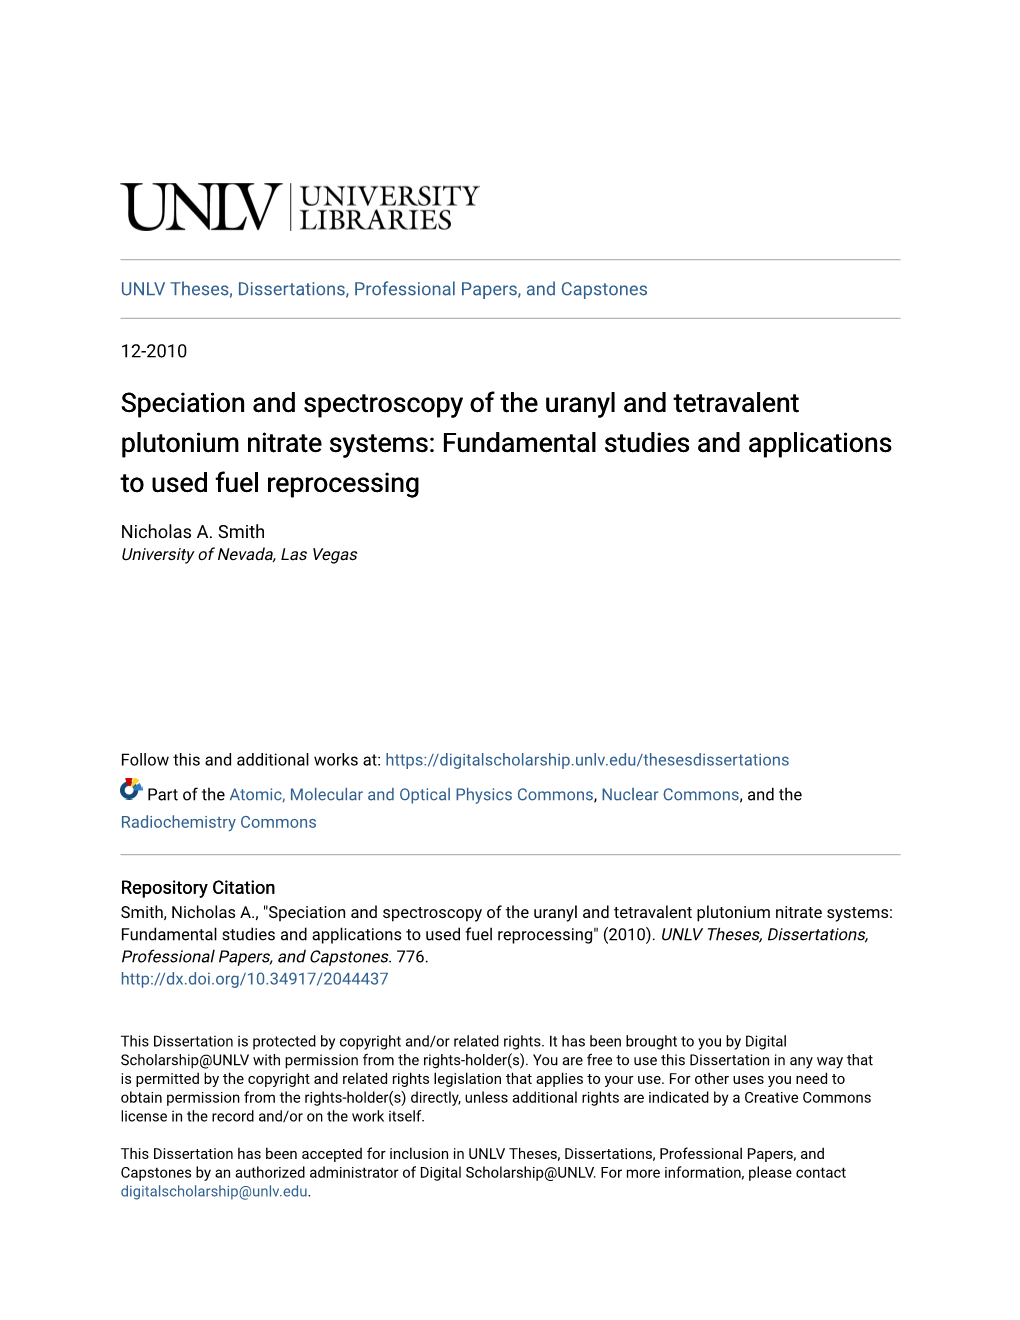 Speciation and Spectroscopy of the Uranyl and Tetravalent Plutonium Nitrate Systems: Fundamental Studies and Applications to Used Fuel Reprocessing